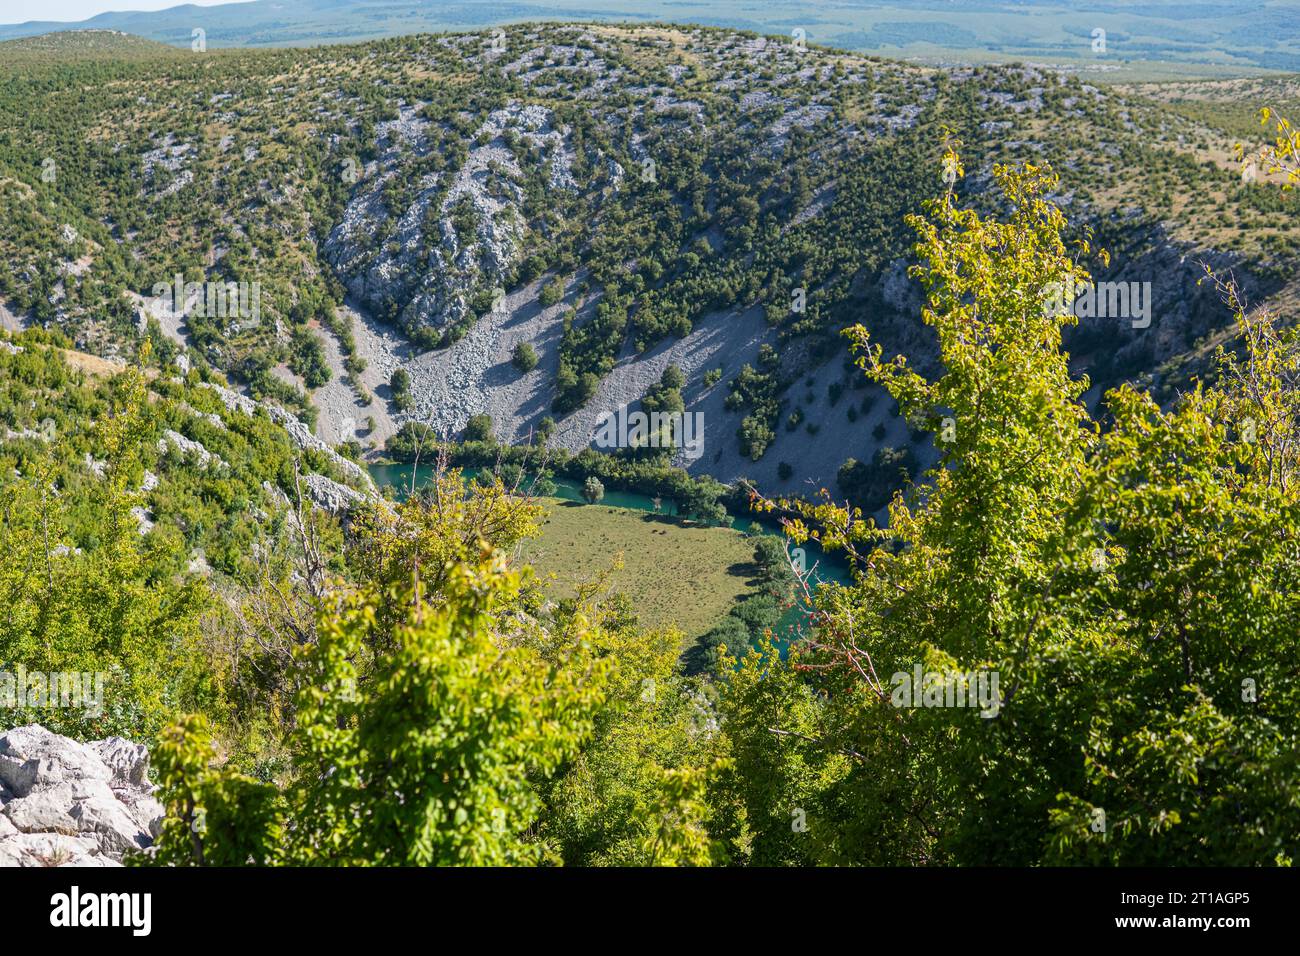 Landscape with a valley of Krupa river in Croatia on carst terrain Stock Photo